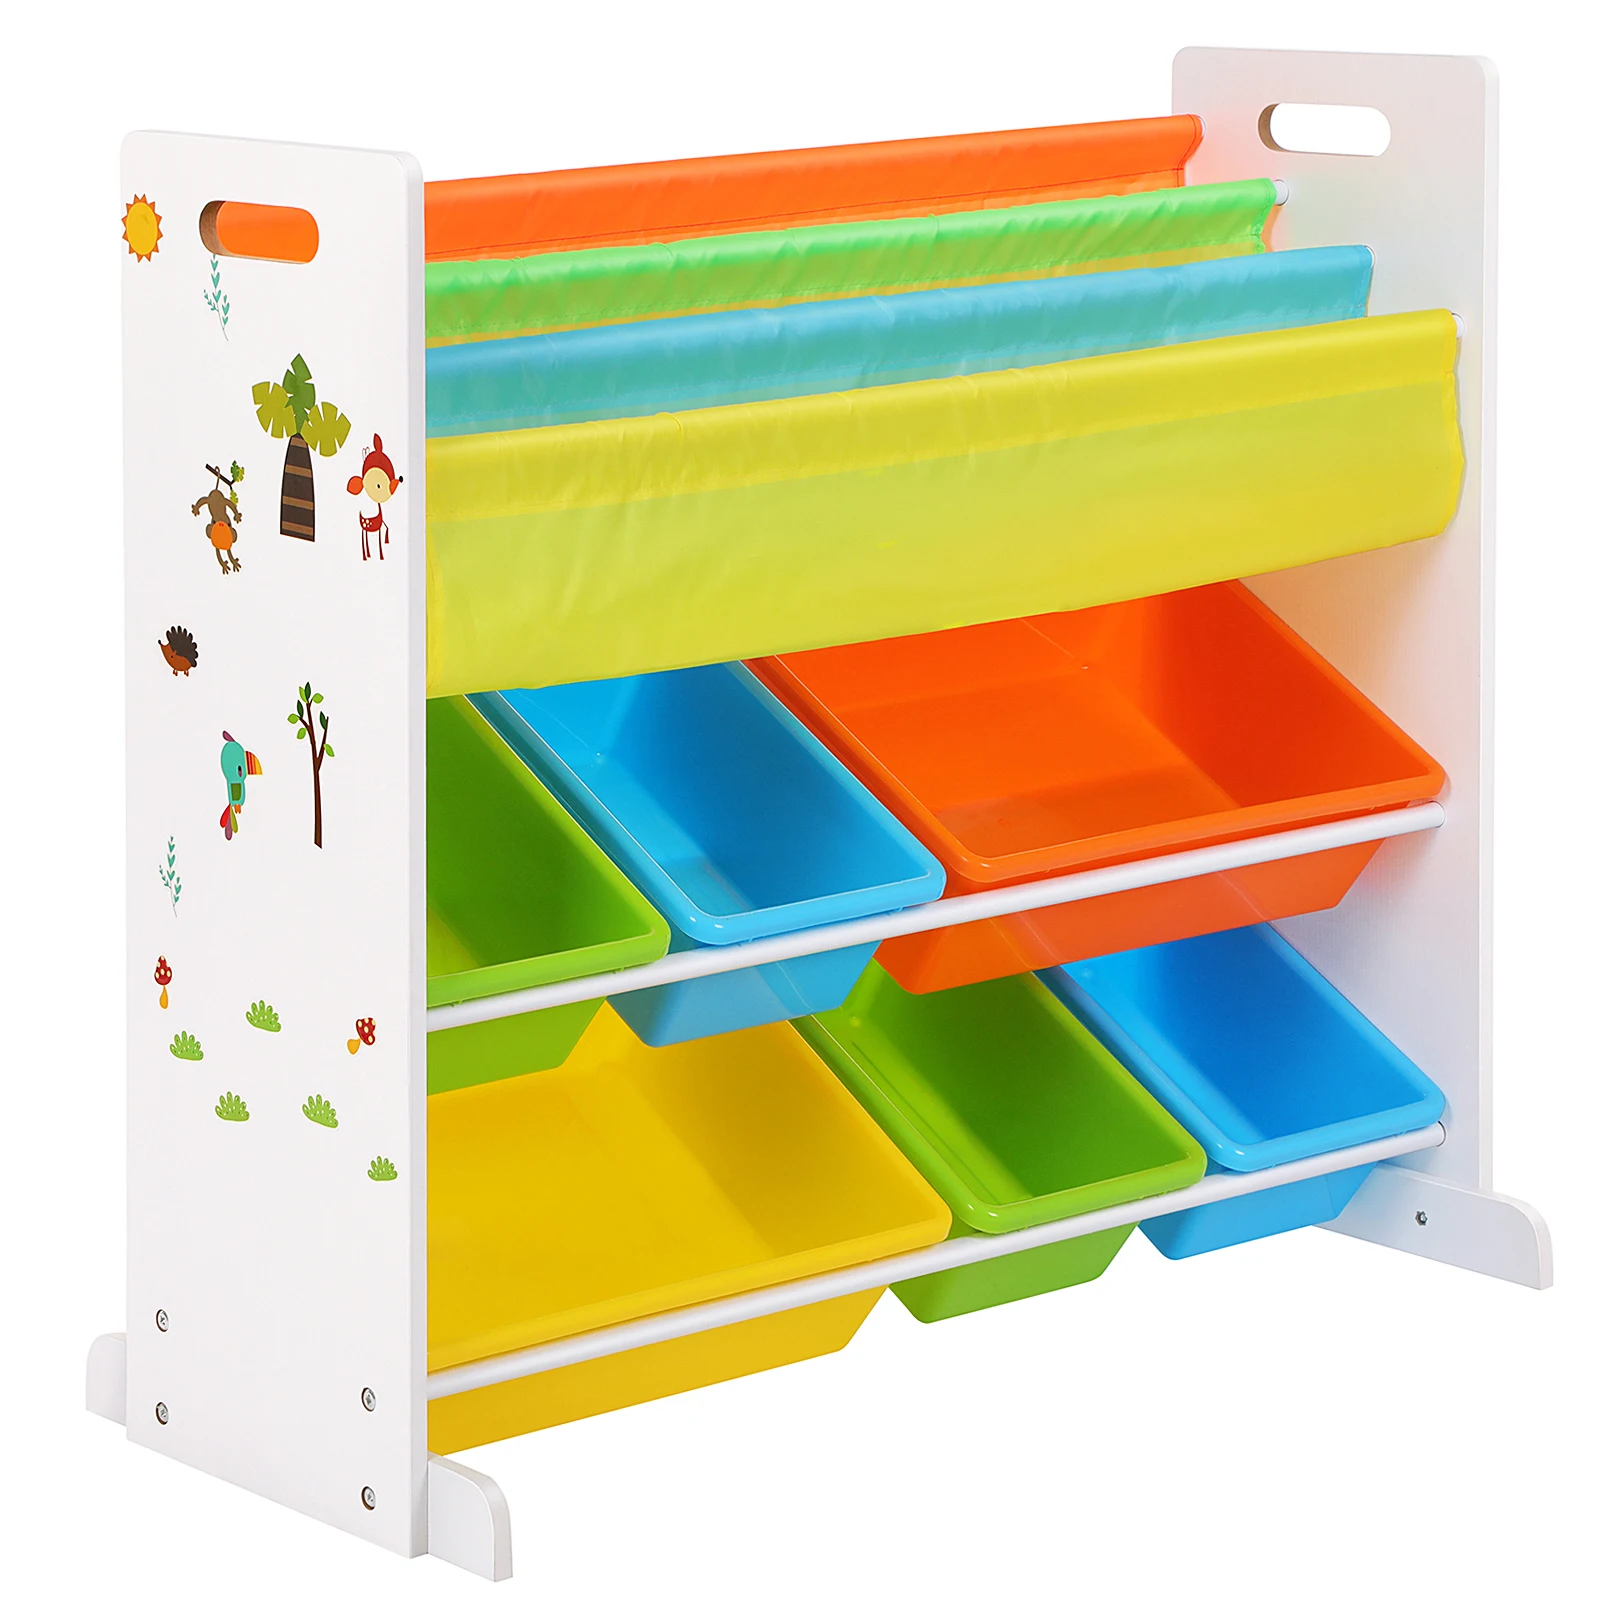 Children bedroom furniture Wooden toy shelf kids cabinet with plastic storage box for sale (1600332002440)